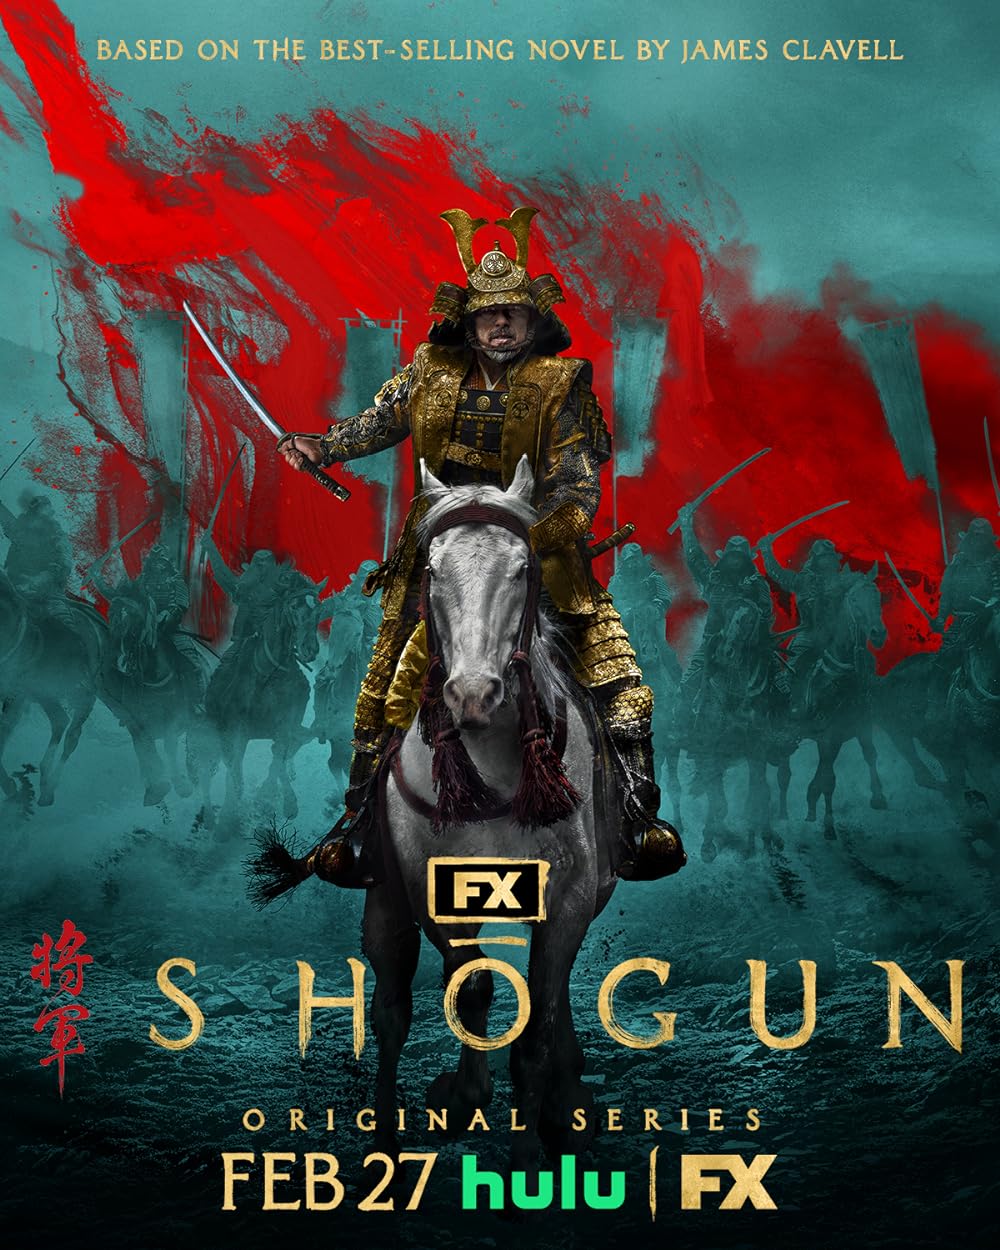 Shogun (February 27) - Streaming on Disney+ HotstarShogun, a fictionalized version of real events and history, is a gripping drama series that weaves intricate tales of ambition, power, and identity across cultures. It centers on John Blackthorne (Cosmo Jarvis), an adventurous English sailor shipwrecked in Japan. He entangles with Lord Toranaga (Hiroyuki Sanada), a cunning daimyo battling political rivals, and Lady Mariko (Anna Sawai), a skilled but dishonored samurai.